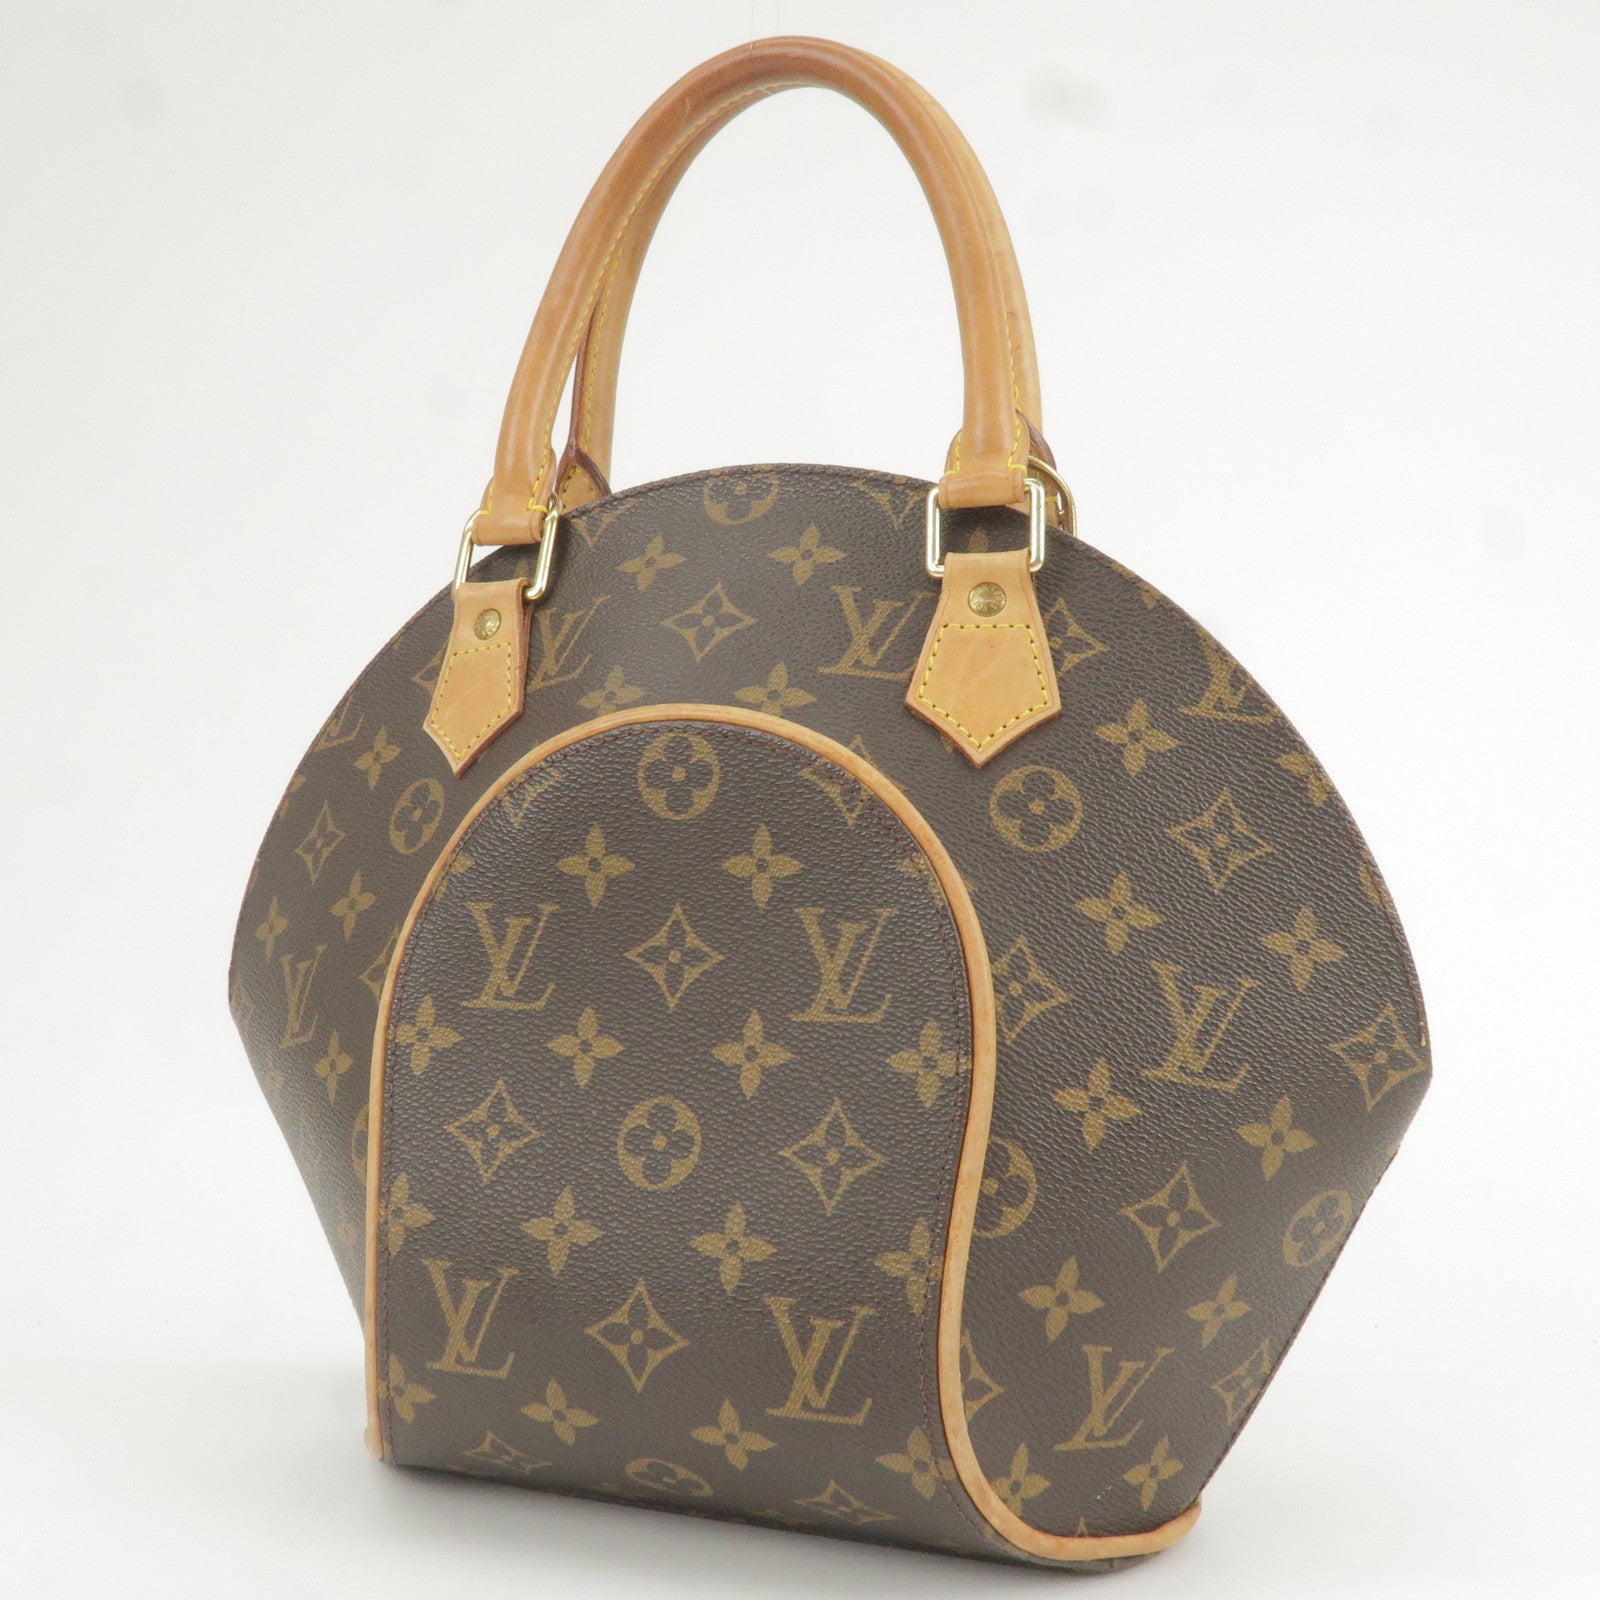 Shop for Louis Vuitton Monogram Canvas Leather Trocadero 30 cm Bag -  Shipped from USA